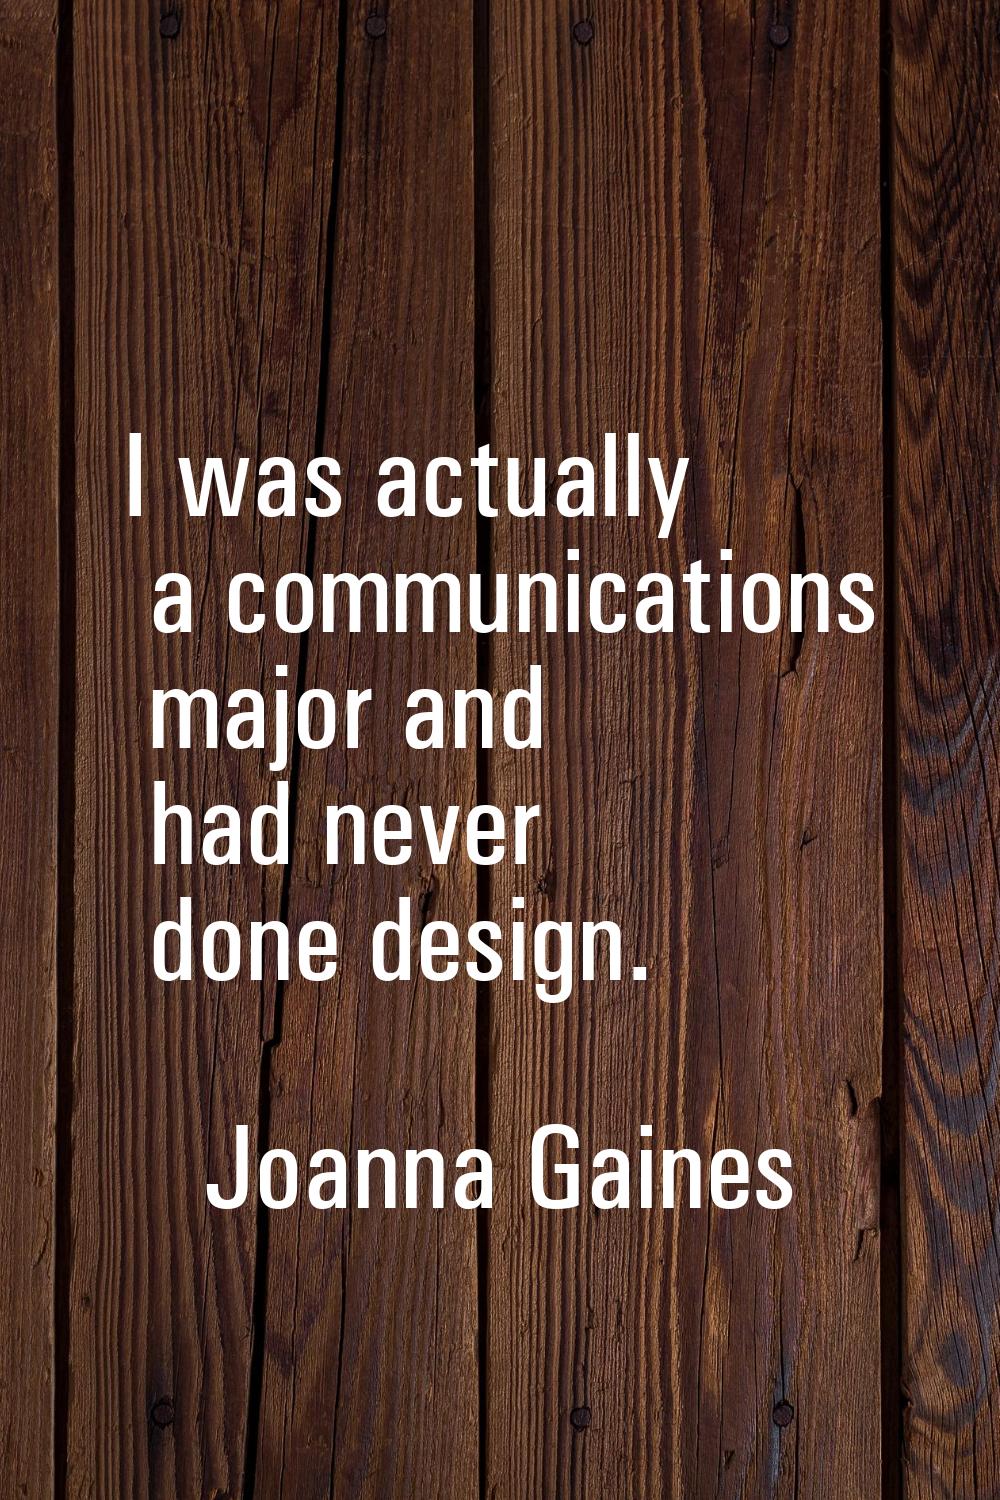 I was actually a communications major and had never done design.